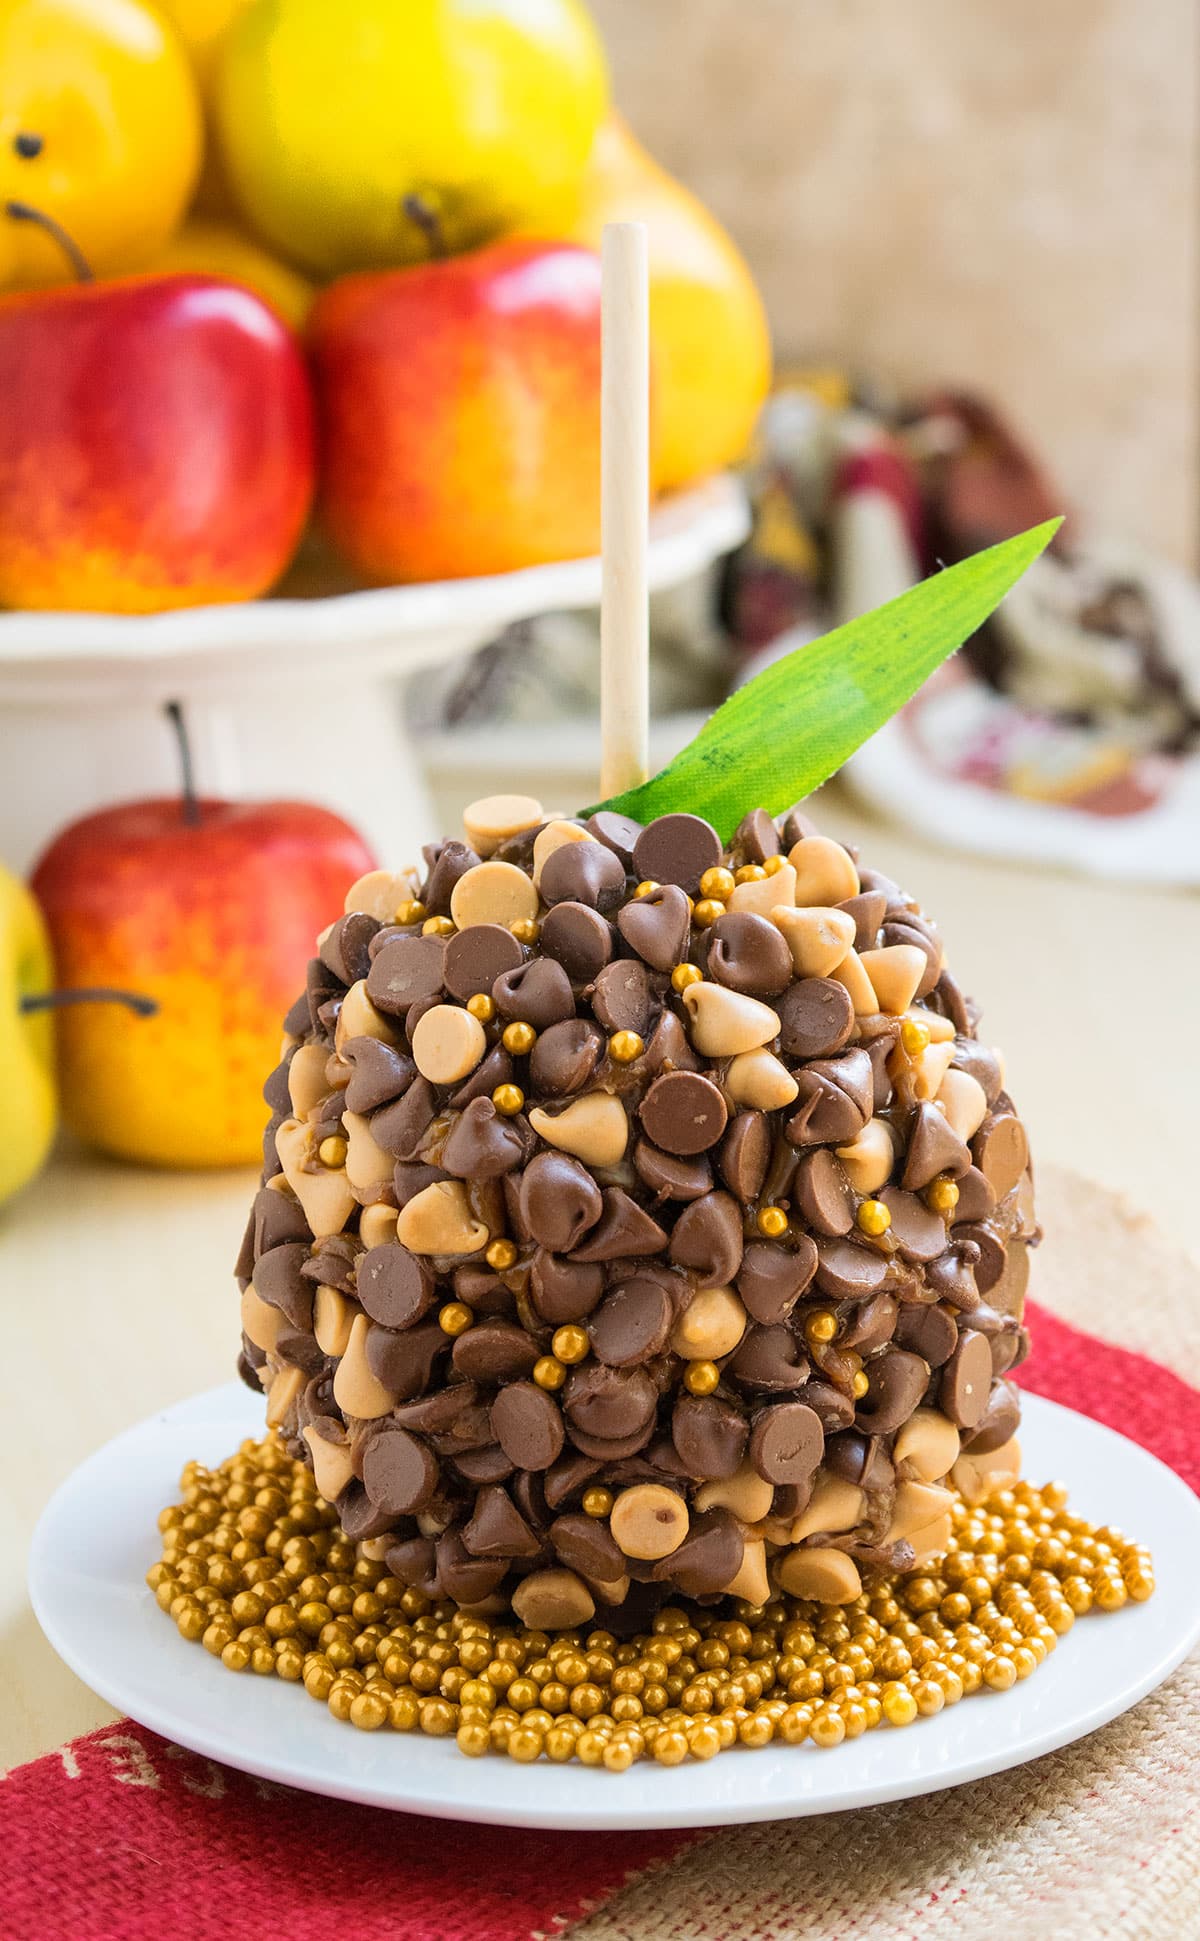 Dipped Caramel Apples on White Dish